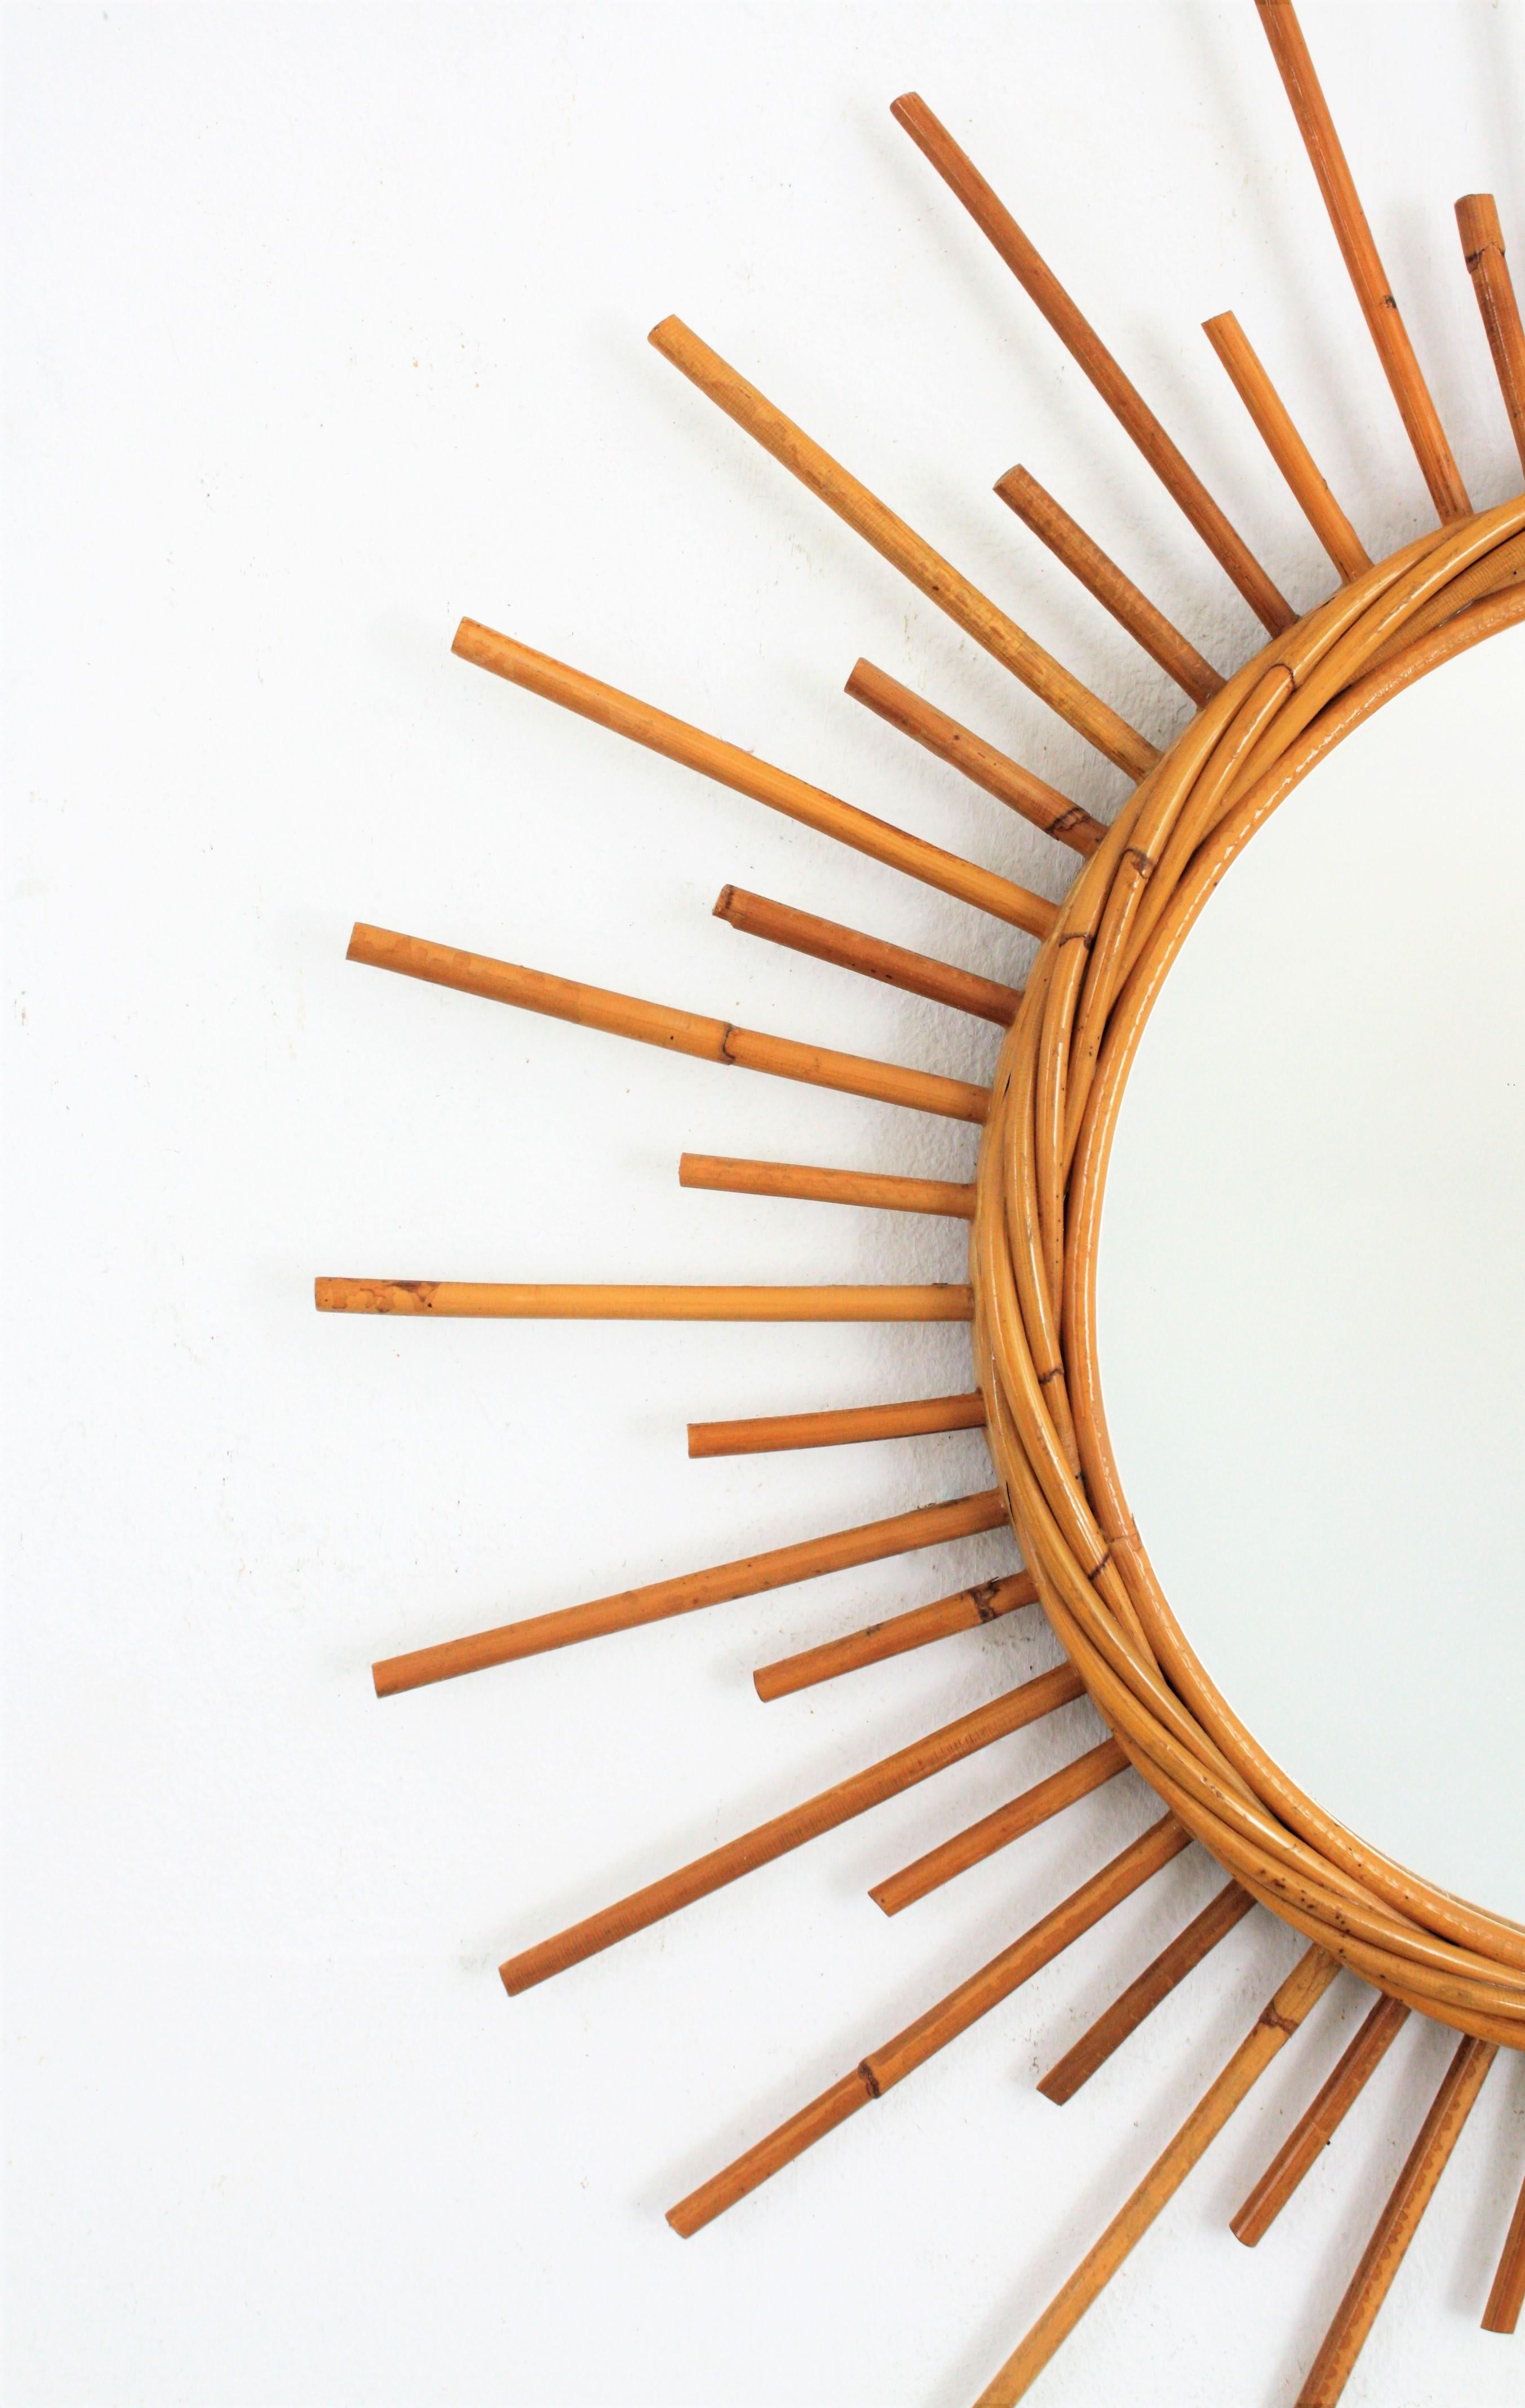 20th Century Rattan Sunburst Mirror from the French Riviera, 1960s For Sale